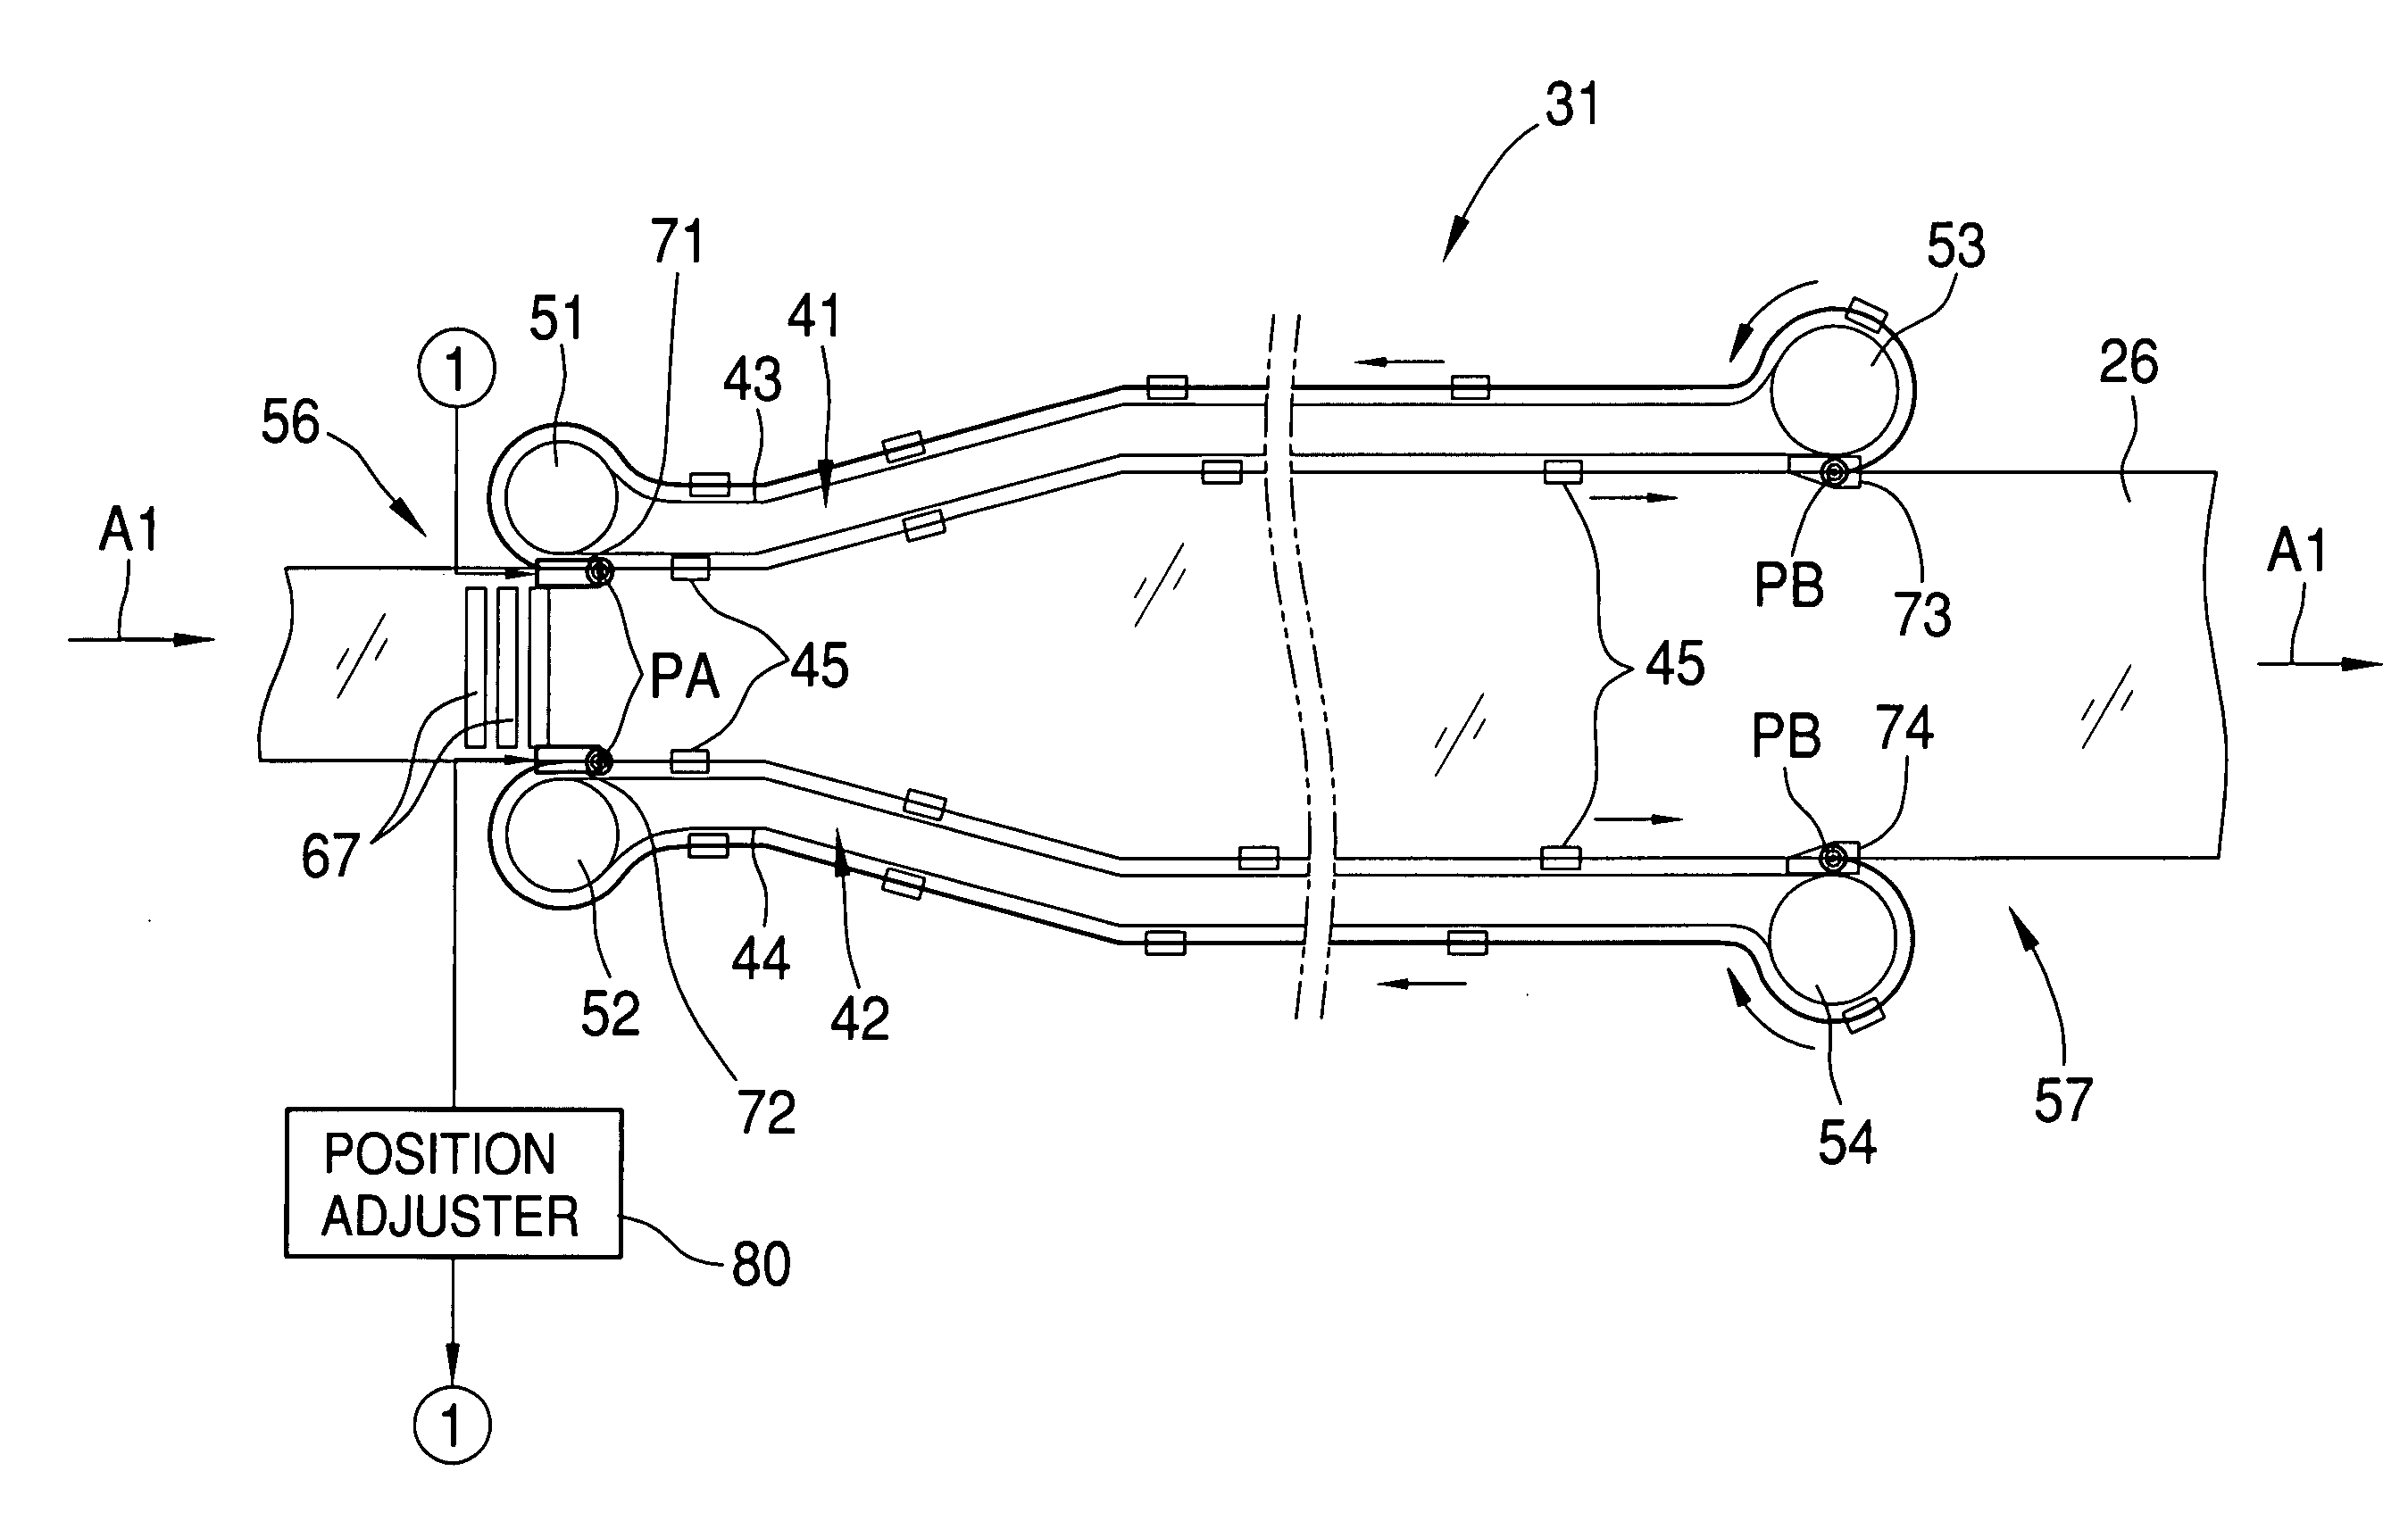 Film stretching apparatus and solution film-forming method